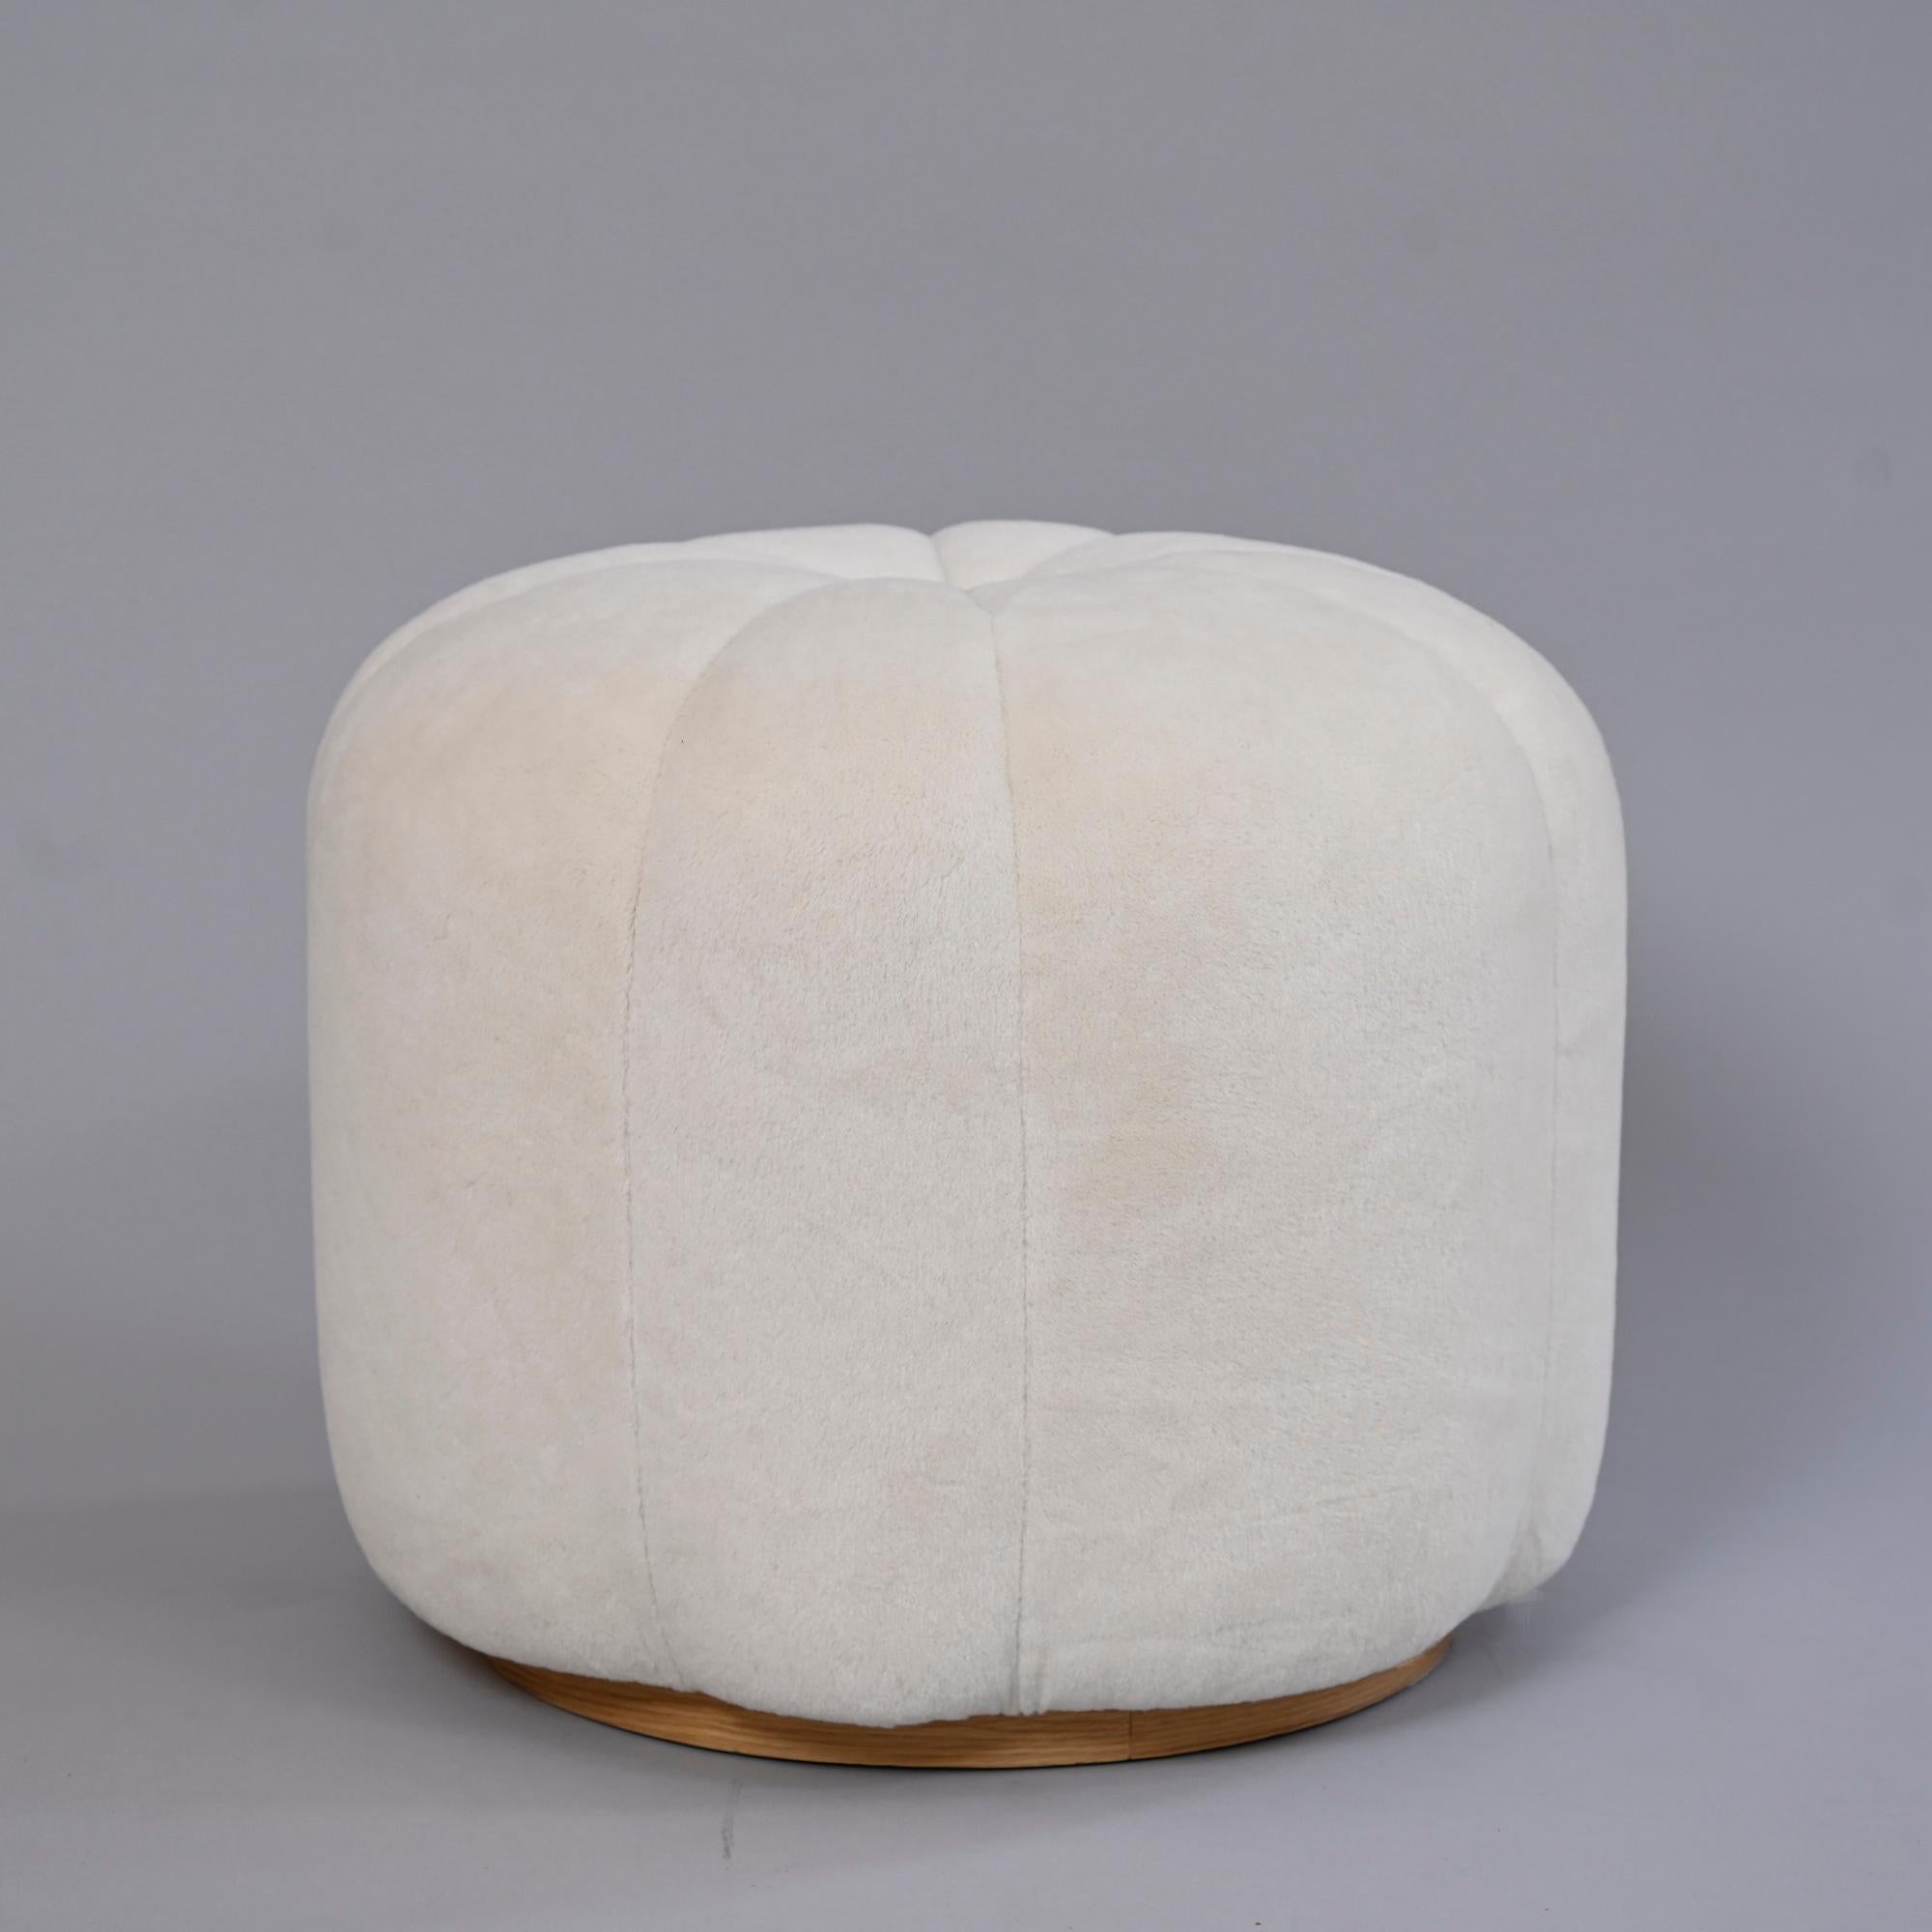 Handmade in England, UK.

Curved ottoman or pouffe, upholstered in a soft off white alpaca wool velvet.

Other fabrics /colour available on request.